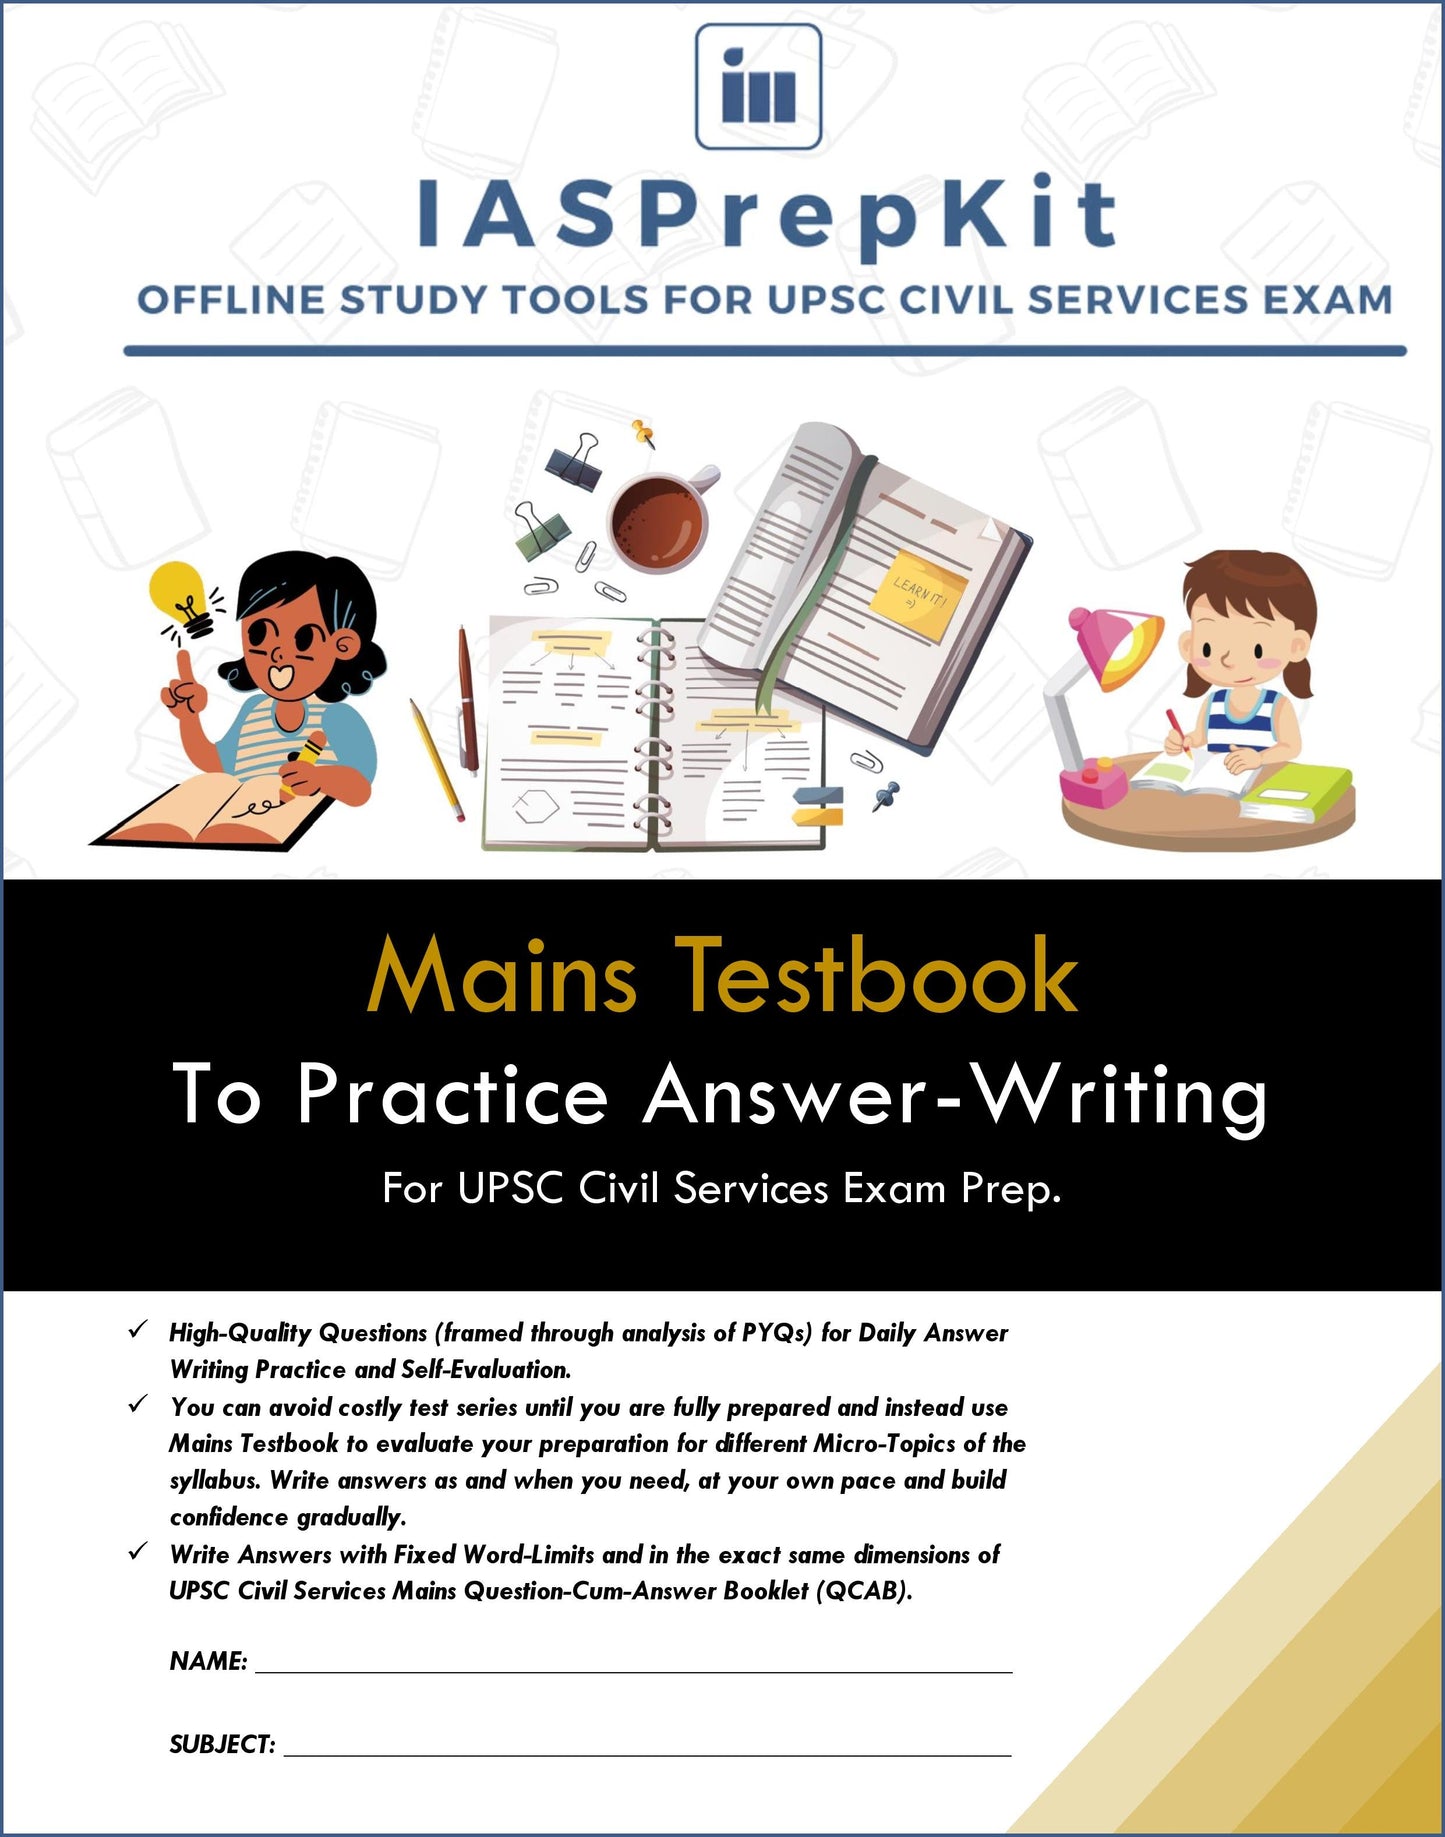 Combo of GS 1,2,3 & 4 - Mains Testbook to Practice Daily Answer-Writing & Self-Evaluation for UPSC Civil Services Exam Prep. (500 Questions)